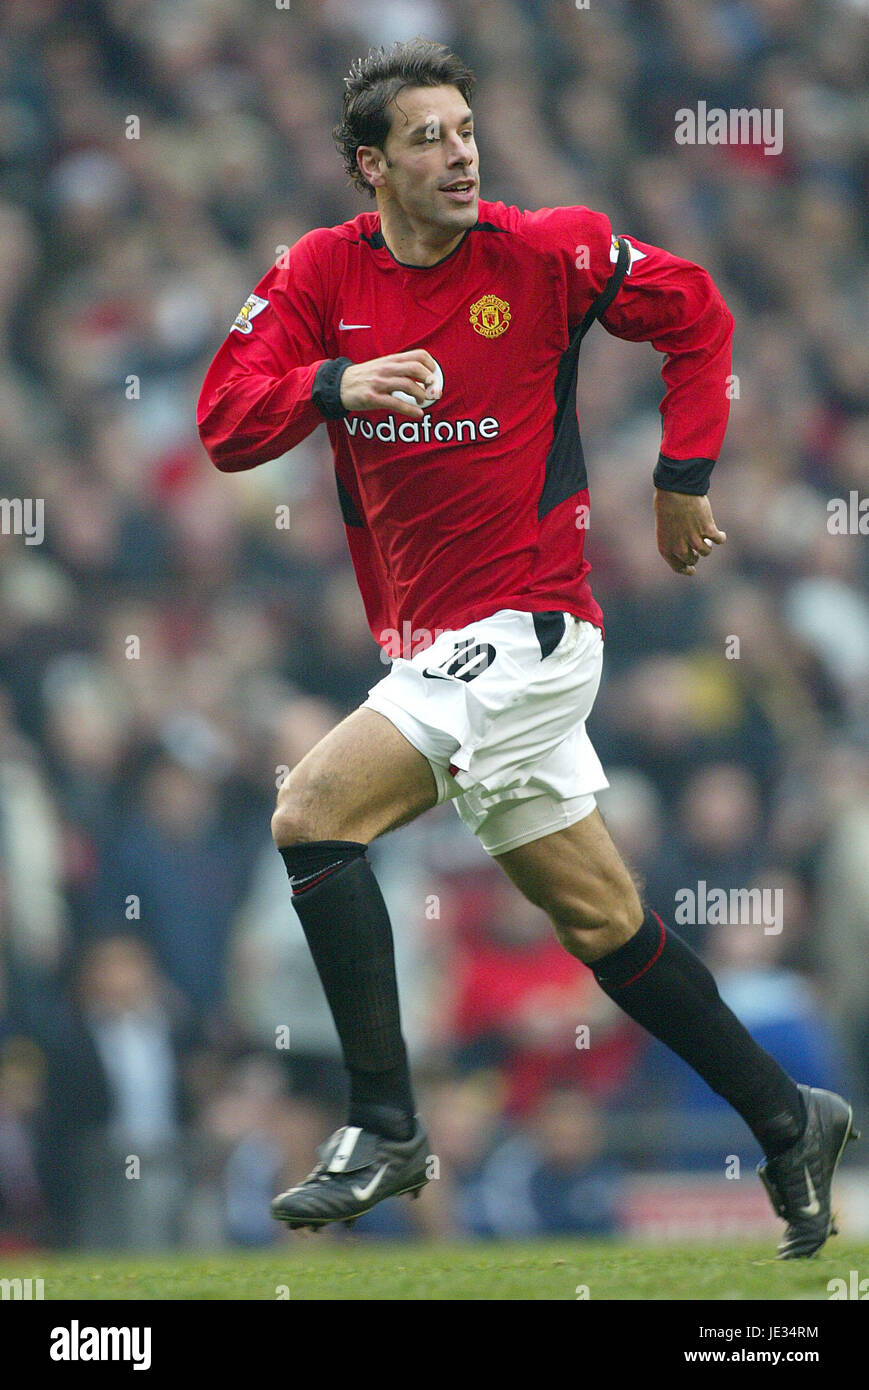 RUUD VAN NISTELROOY MANCHESTER UNITED FC MANCHESTER ENGLAND OLD TRAFFORD 22 November 2003 Stock Photo